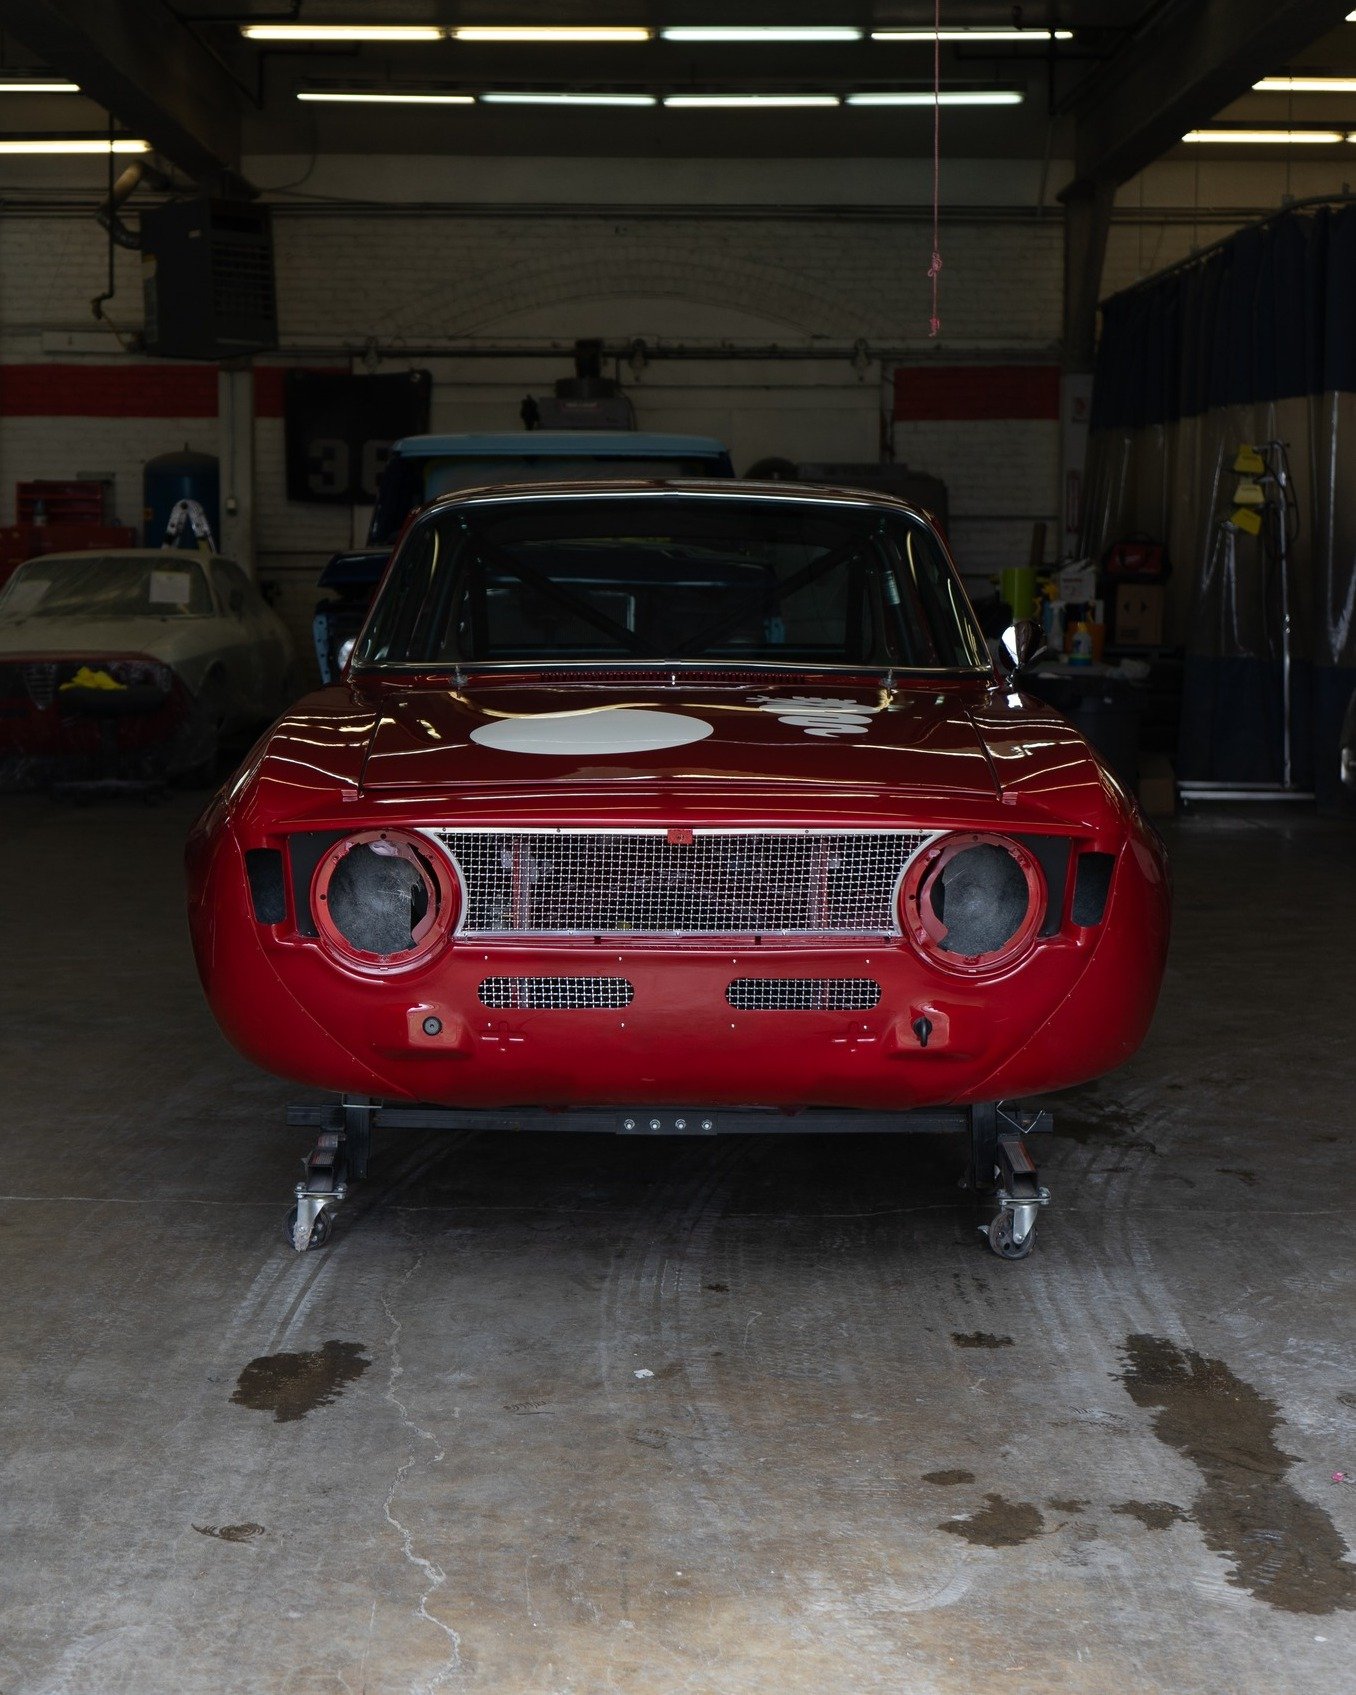 This GTV was born a 73, But after extensive work has been finished as a converted step nose with custom hand layed widened rear arches. This porject has been such a great experiance because of the vision and passion of its owner. I am so very happy t